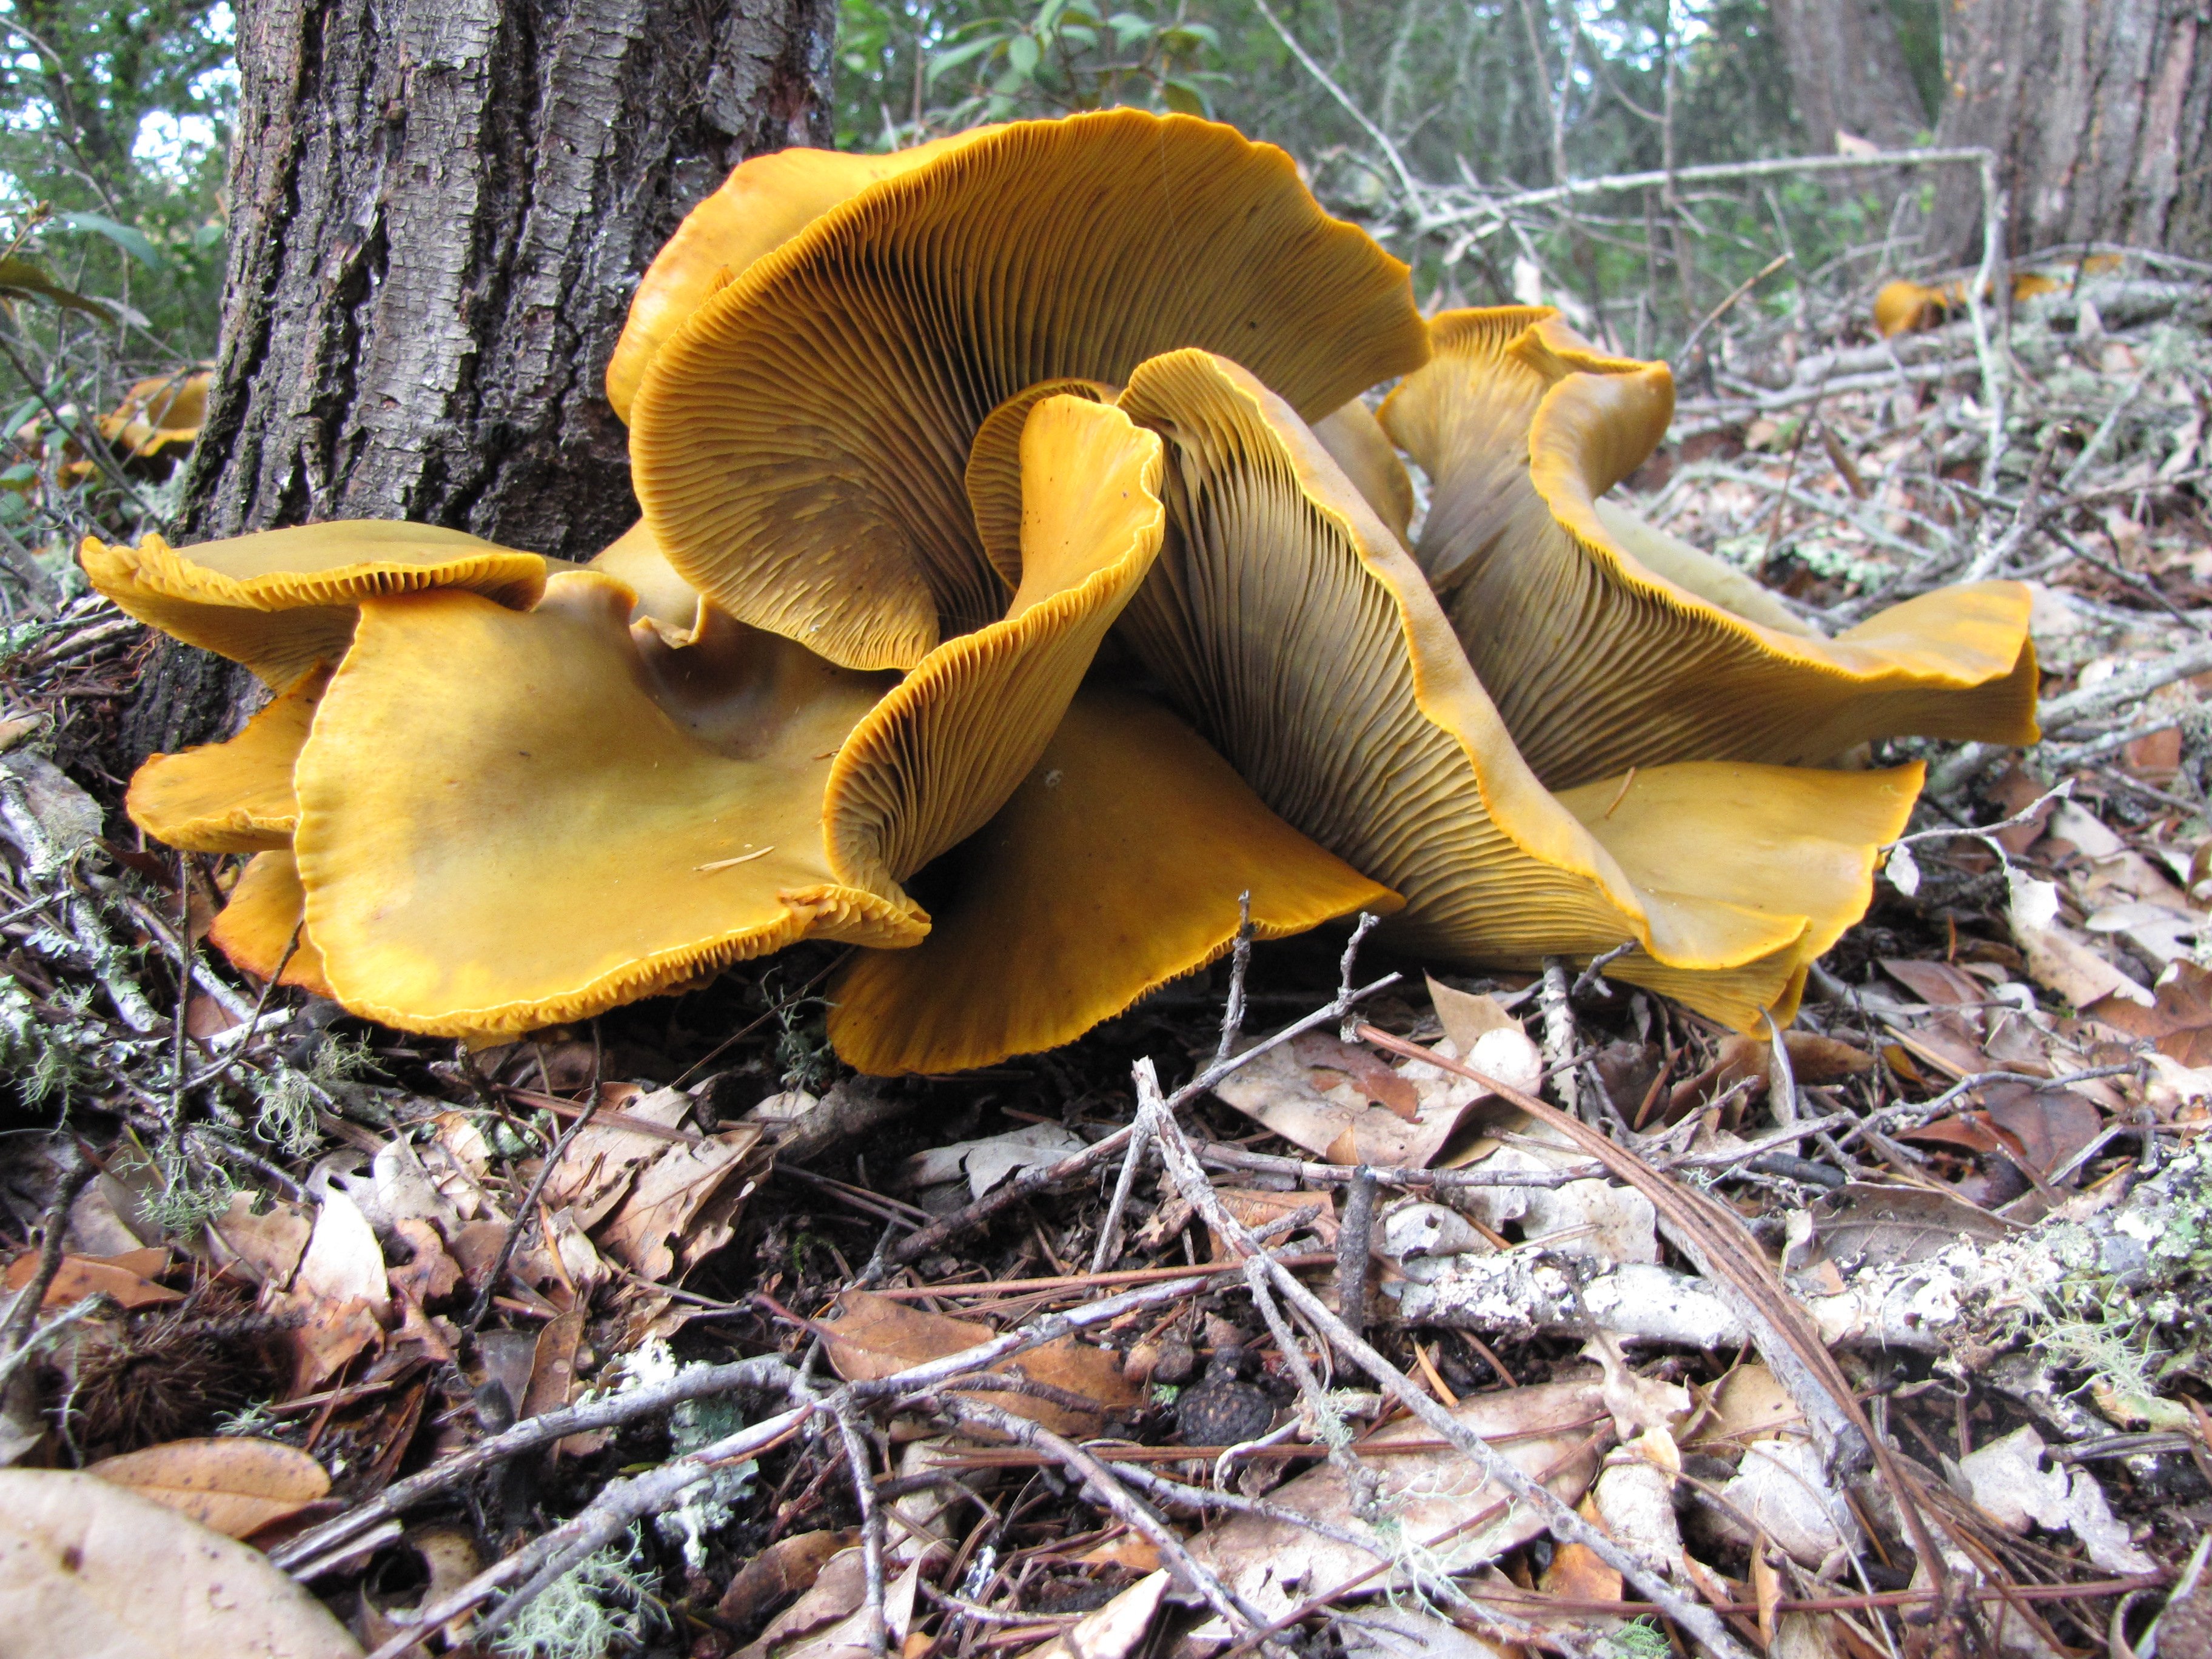 Omphalotus japonica